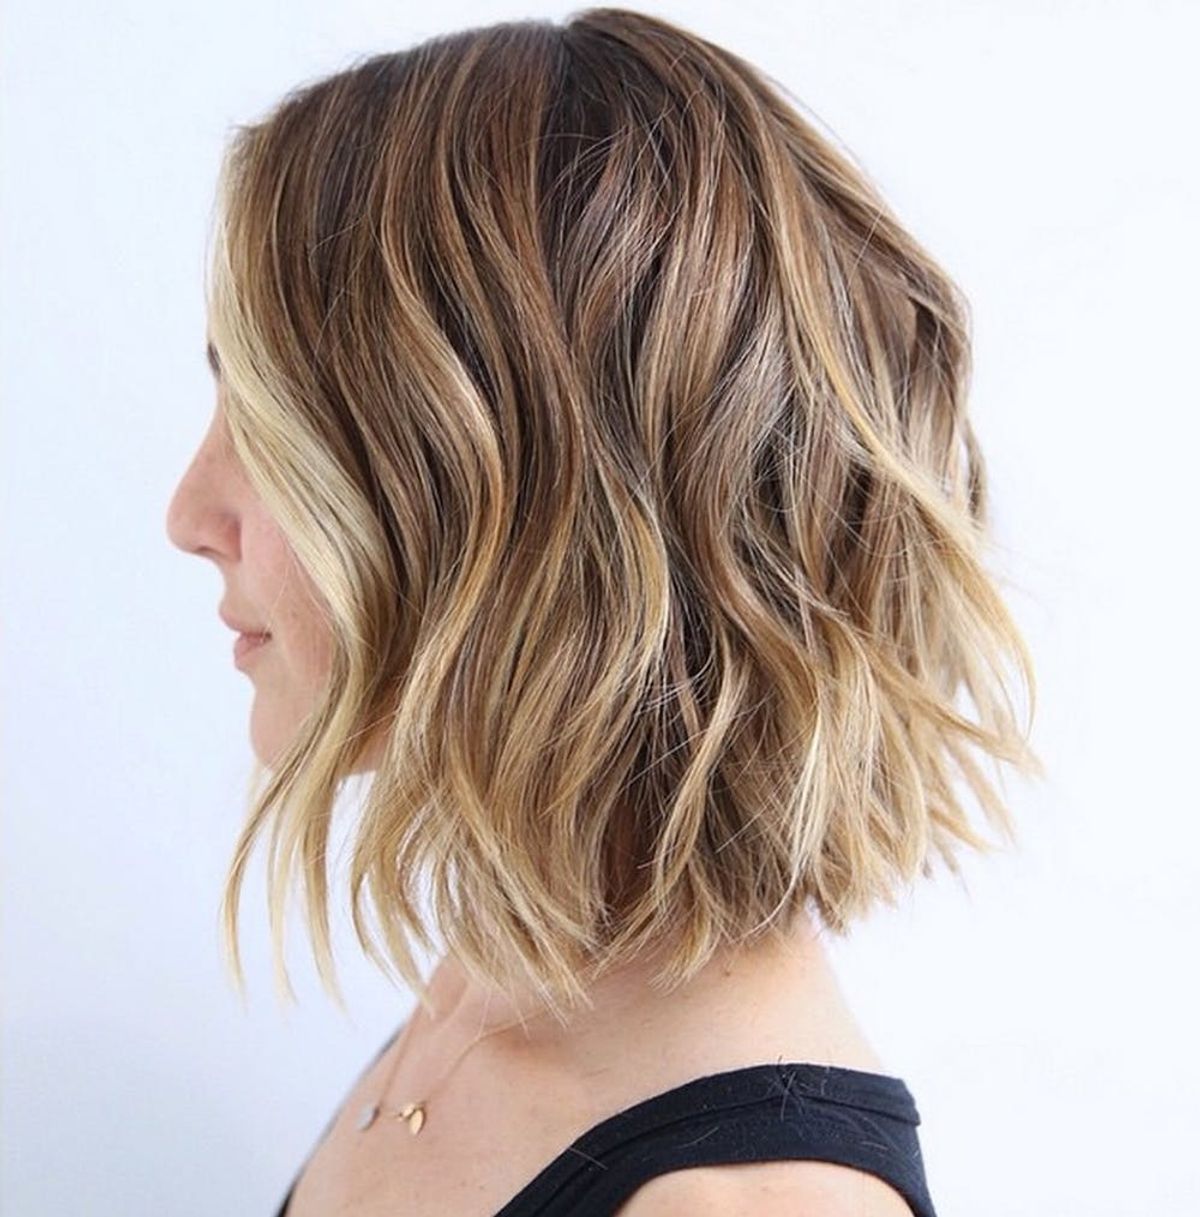 This Is the Hairstylist Trick for Getting Your Dye Job to Last 6 Months ...